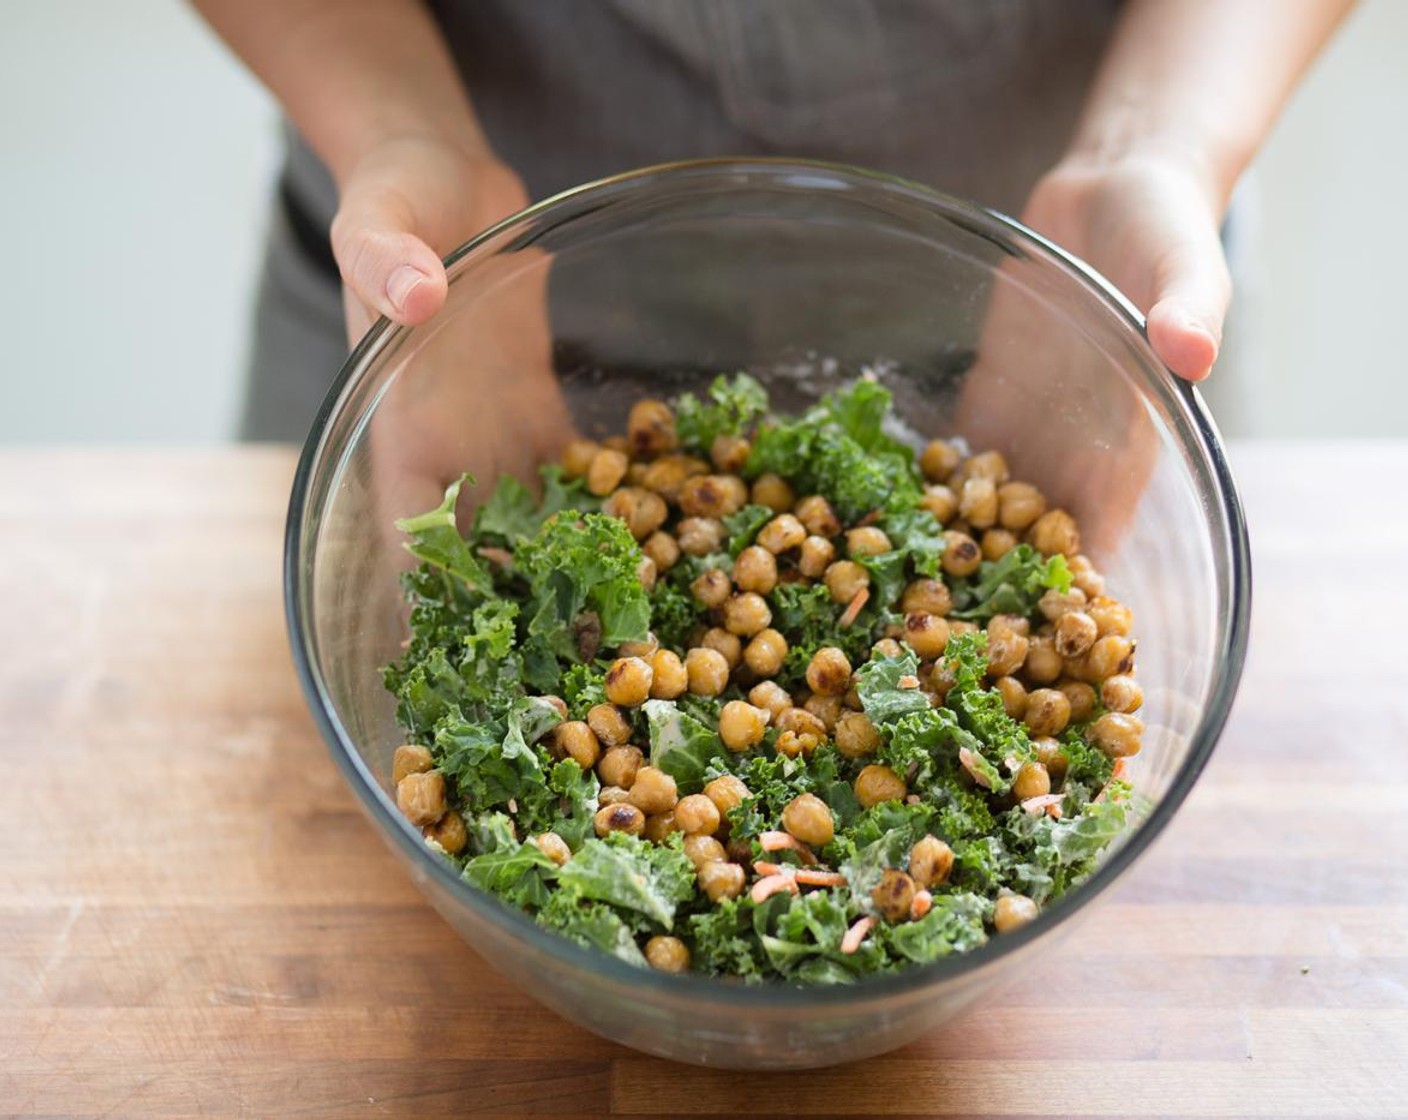 step 7 Add the Kale (3 1/3 cups), Carrot (1/4 cup), Dried Cherry (1/4 cup) and chickpeas to the bowl with the tahini dressing. Toss gently to combine.